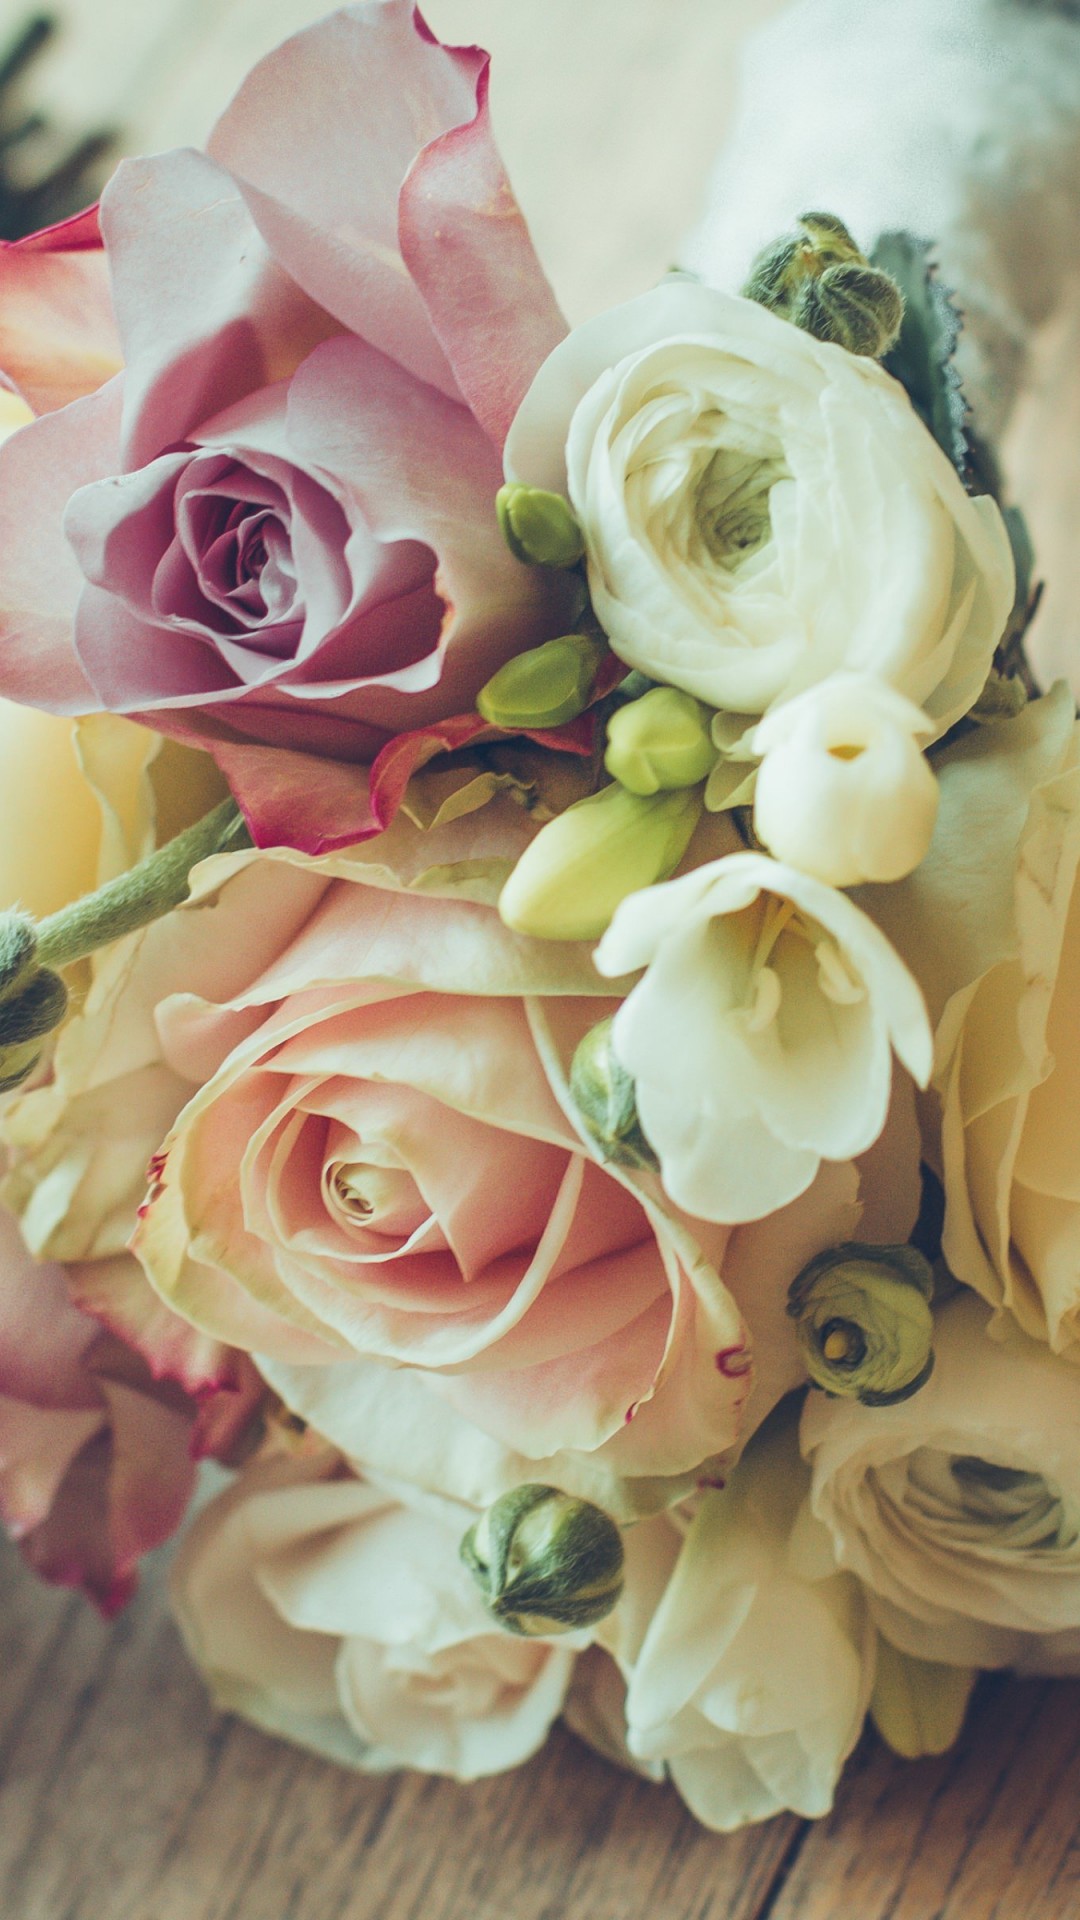 Roses Bouquet Composition Wallpaper for SAMSUNG Galaxy S5